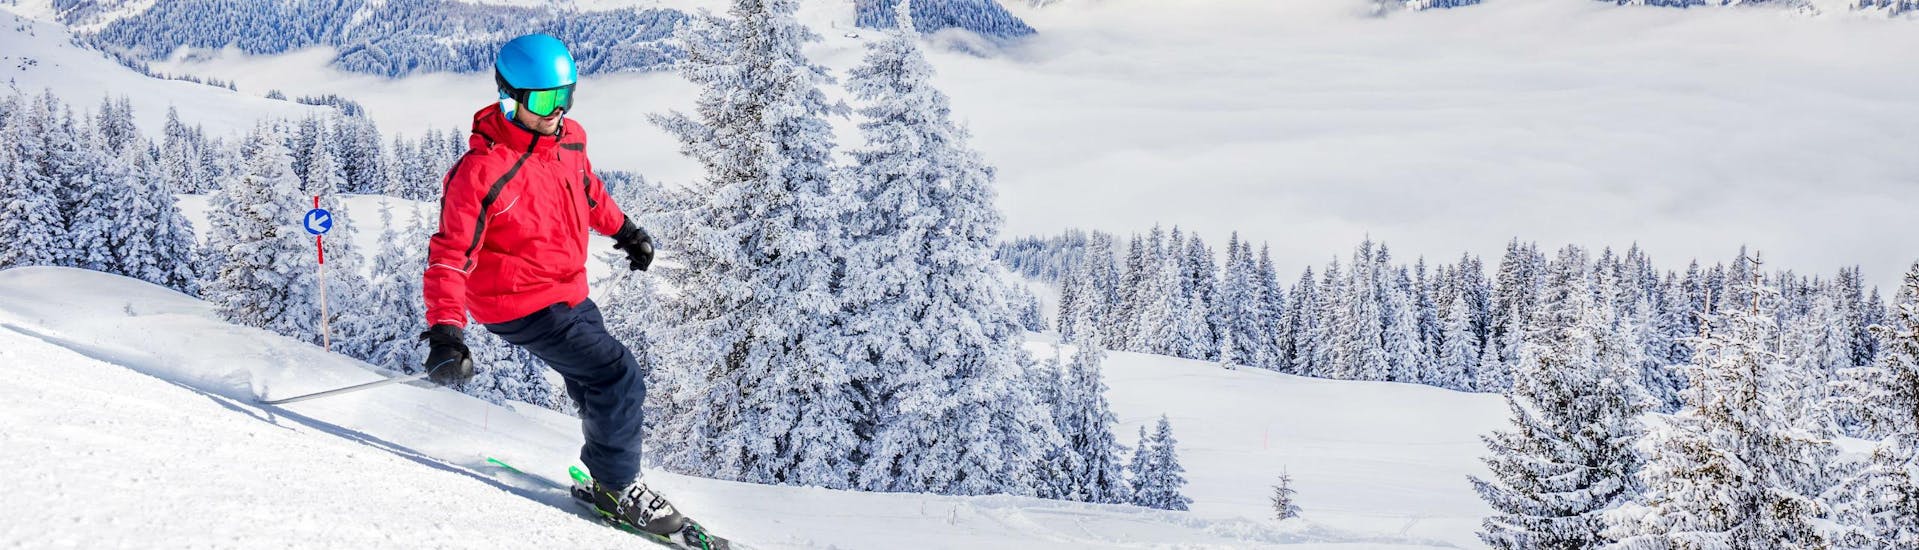 A skier is skiing down a ski slope with fresh powder snow and a stunning view of the surrounding Alps in the Kitzbühel area, where local ski schools offer a variety of ski lessons for anyone who wants to learn to ski.